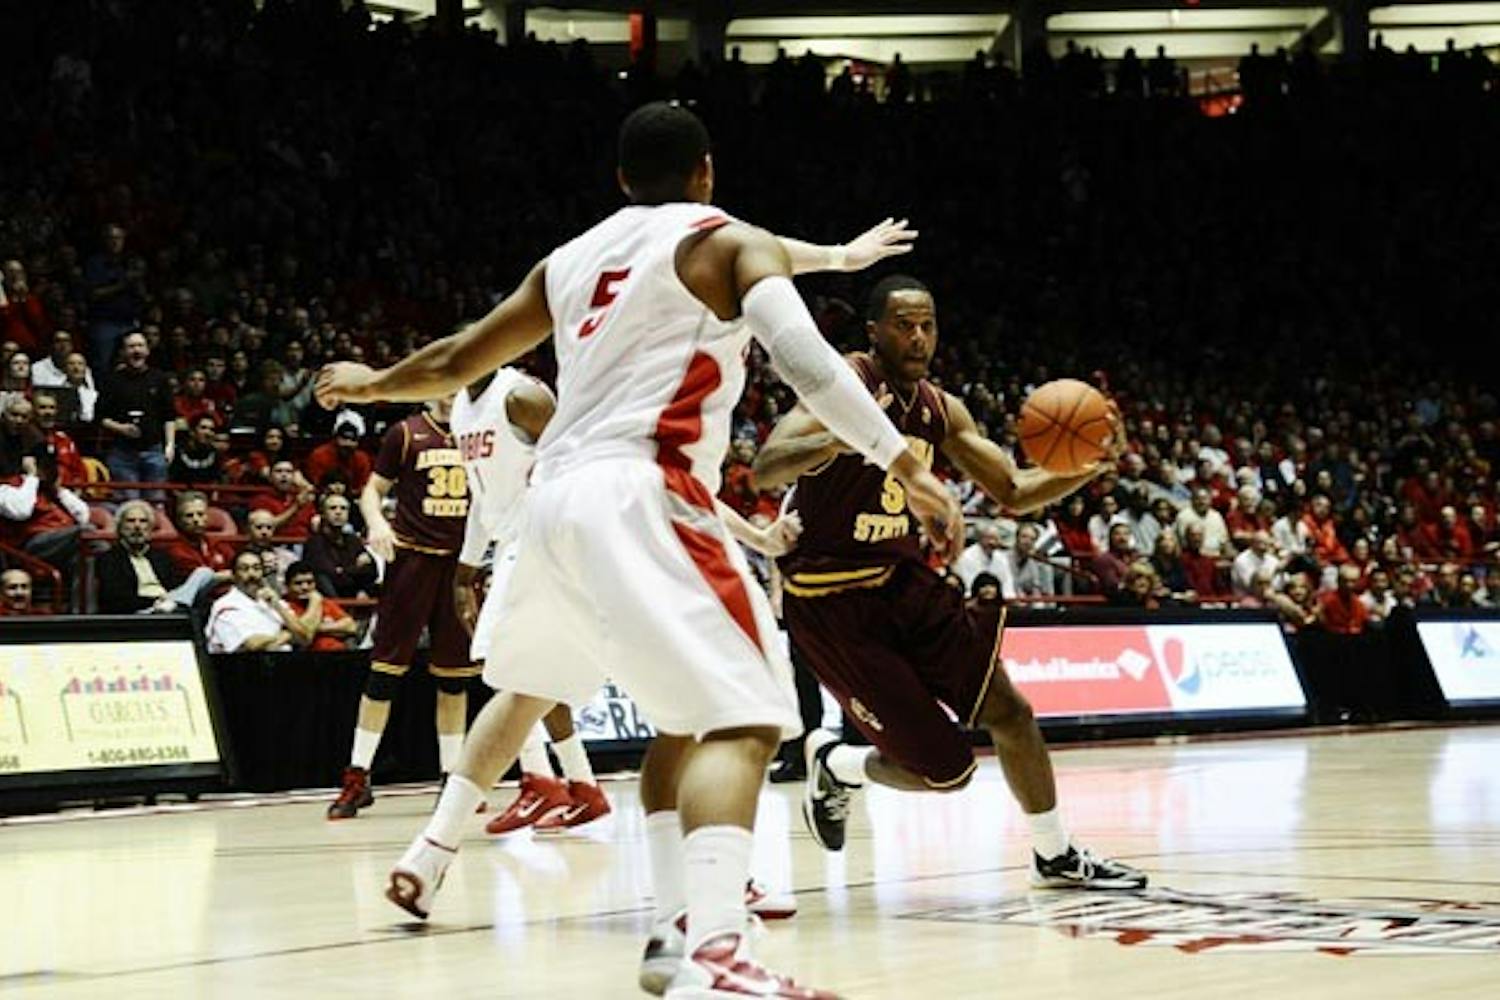 ROUGH ROAD: Freshman forward Kyle Cain dribbles into the lane as New Mexico senior guard Dairese Gary defends Tuesday night's Lobos win in Albuquerque. The Sun Devils open at home Saturday against Alabama-Birmingham, a team that has averaged 21.8 wins over the last seven seasons. (Photo Courtesy of the Daily Lobo)